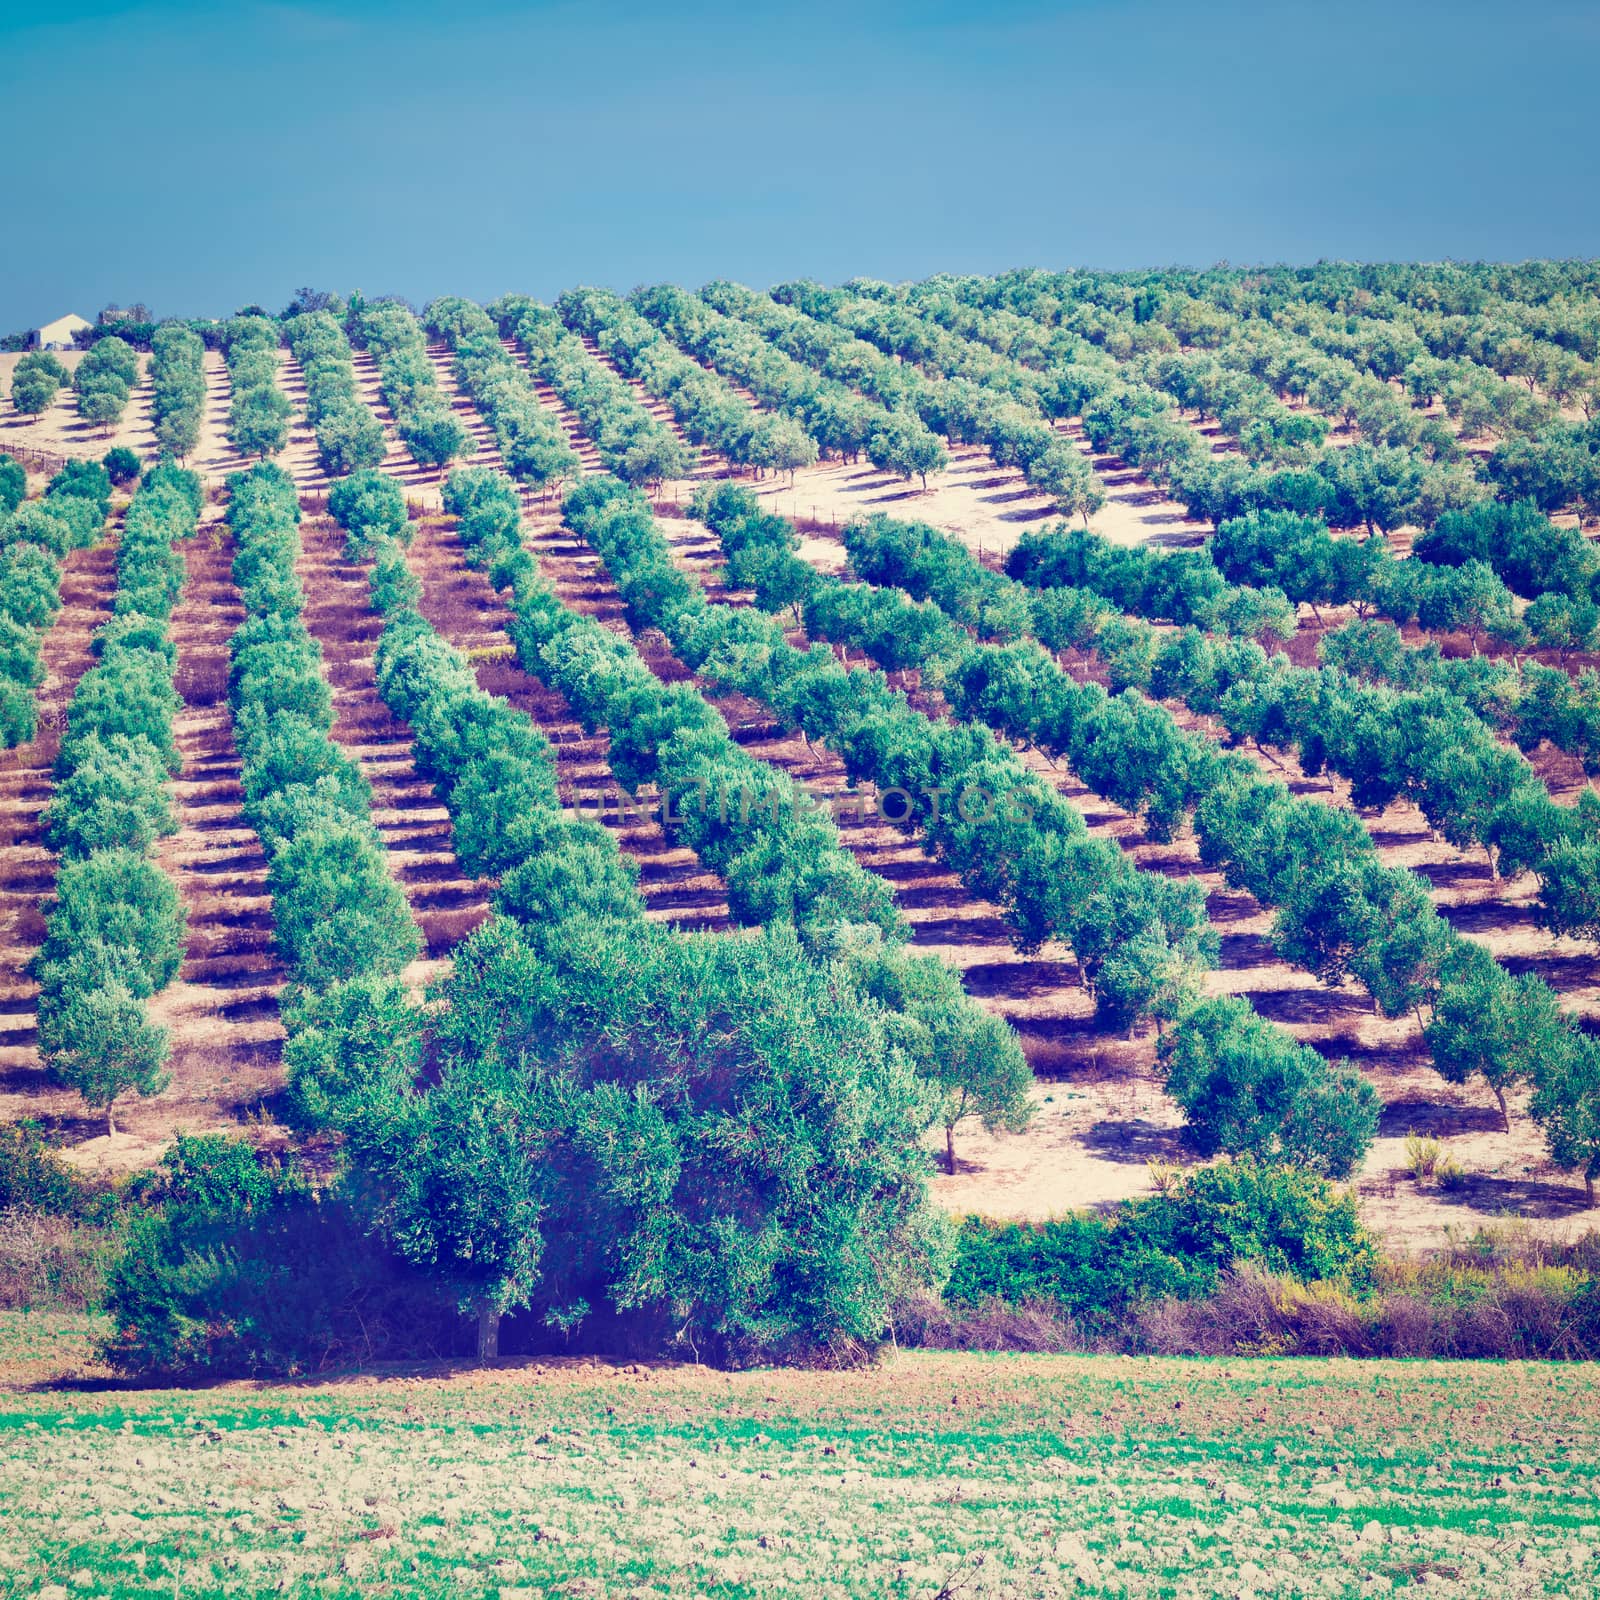 Olive Groves and Plowed Sloping Hills of Spain in the Autumn, Instagram Effect